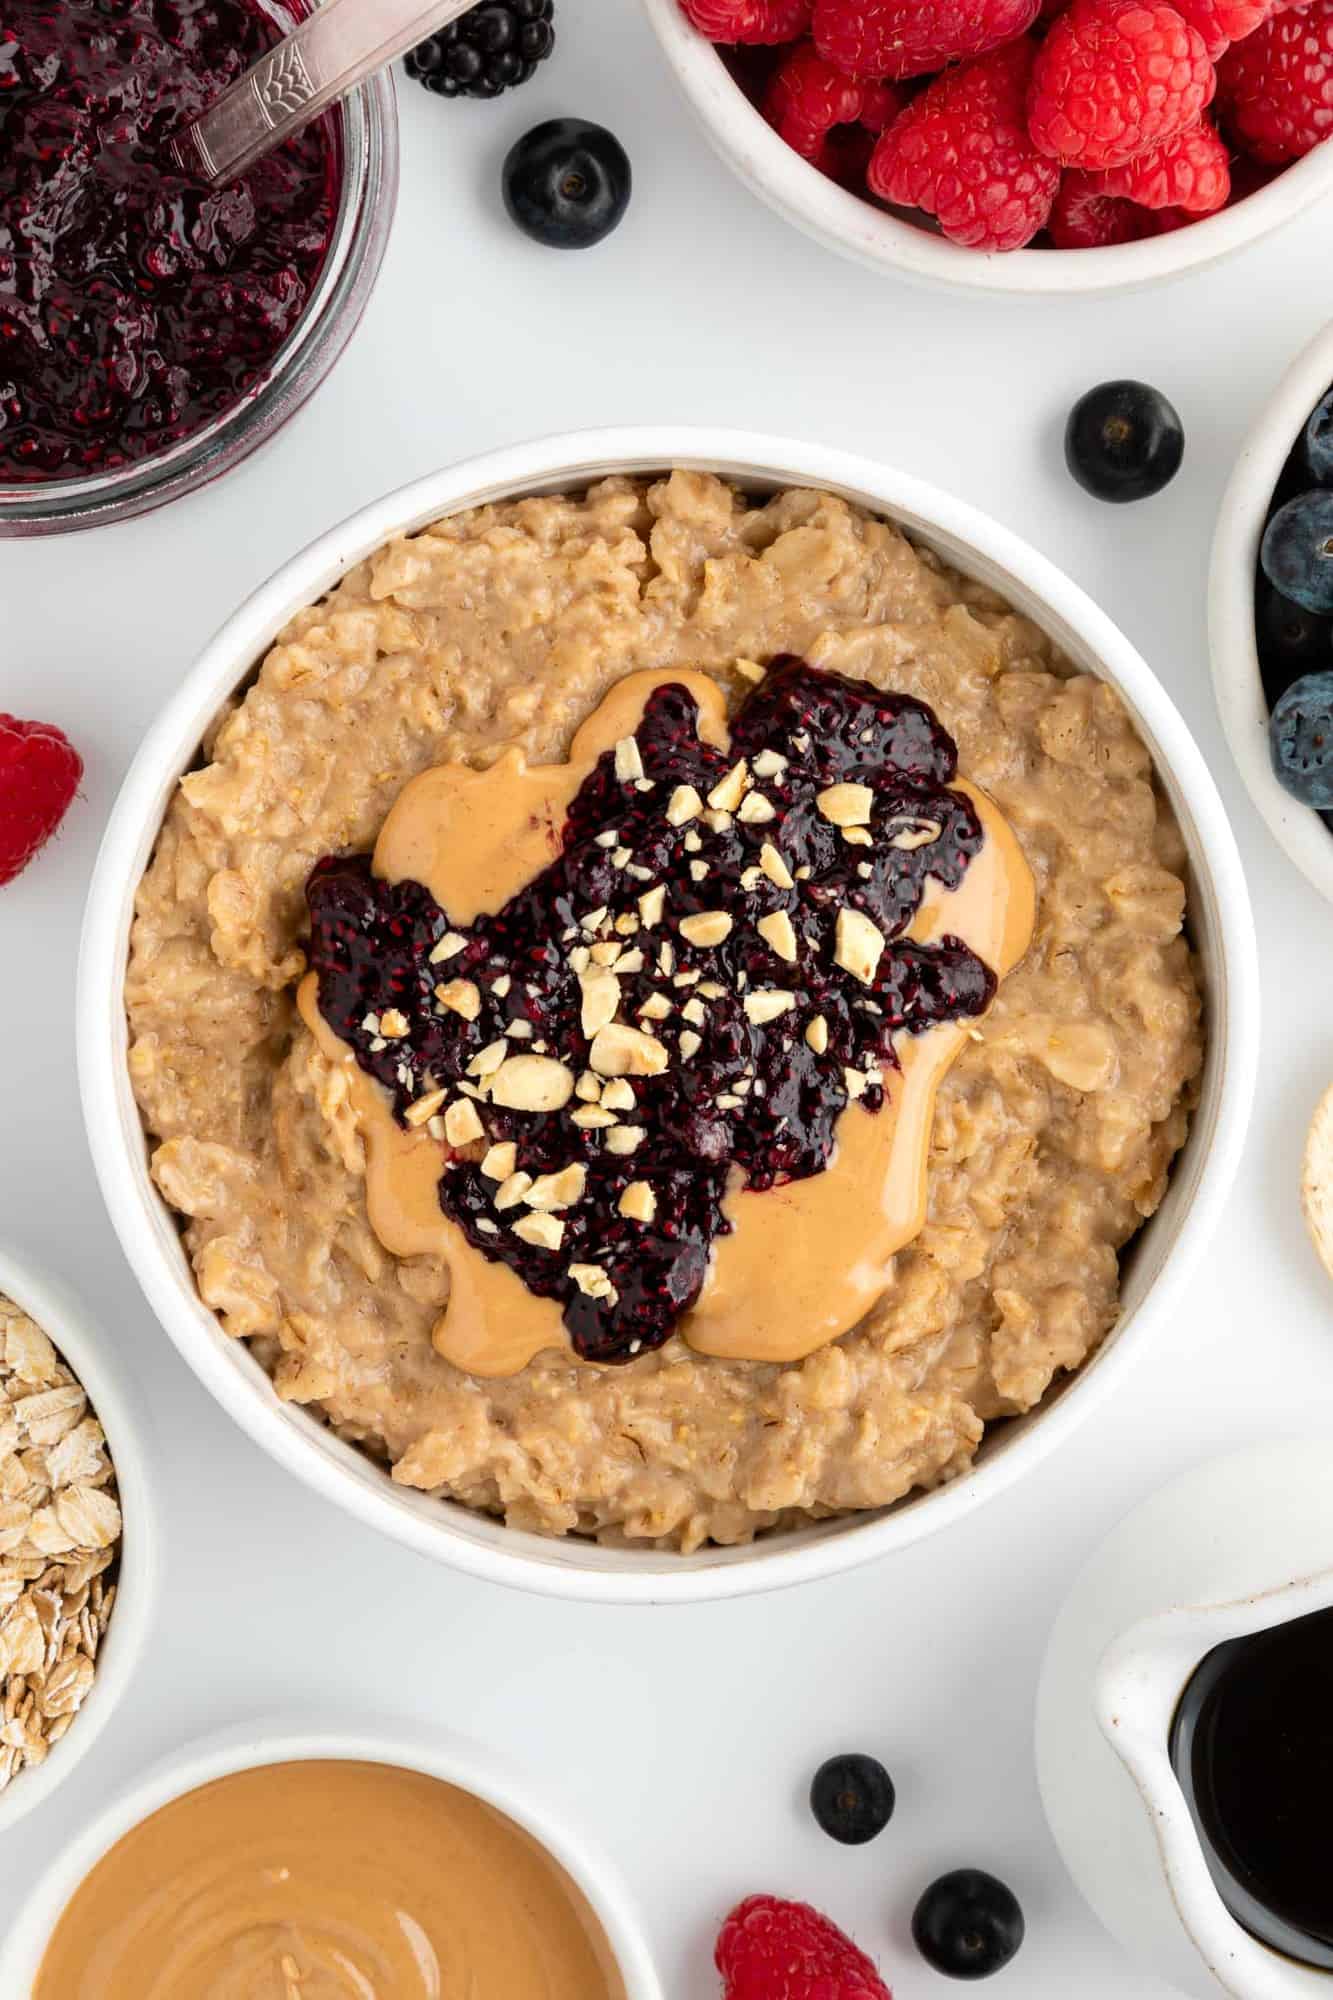 peanut butter and jelly inside a white bowl surrounded by berries, oats, maple syrup, and berry jam